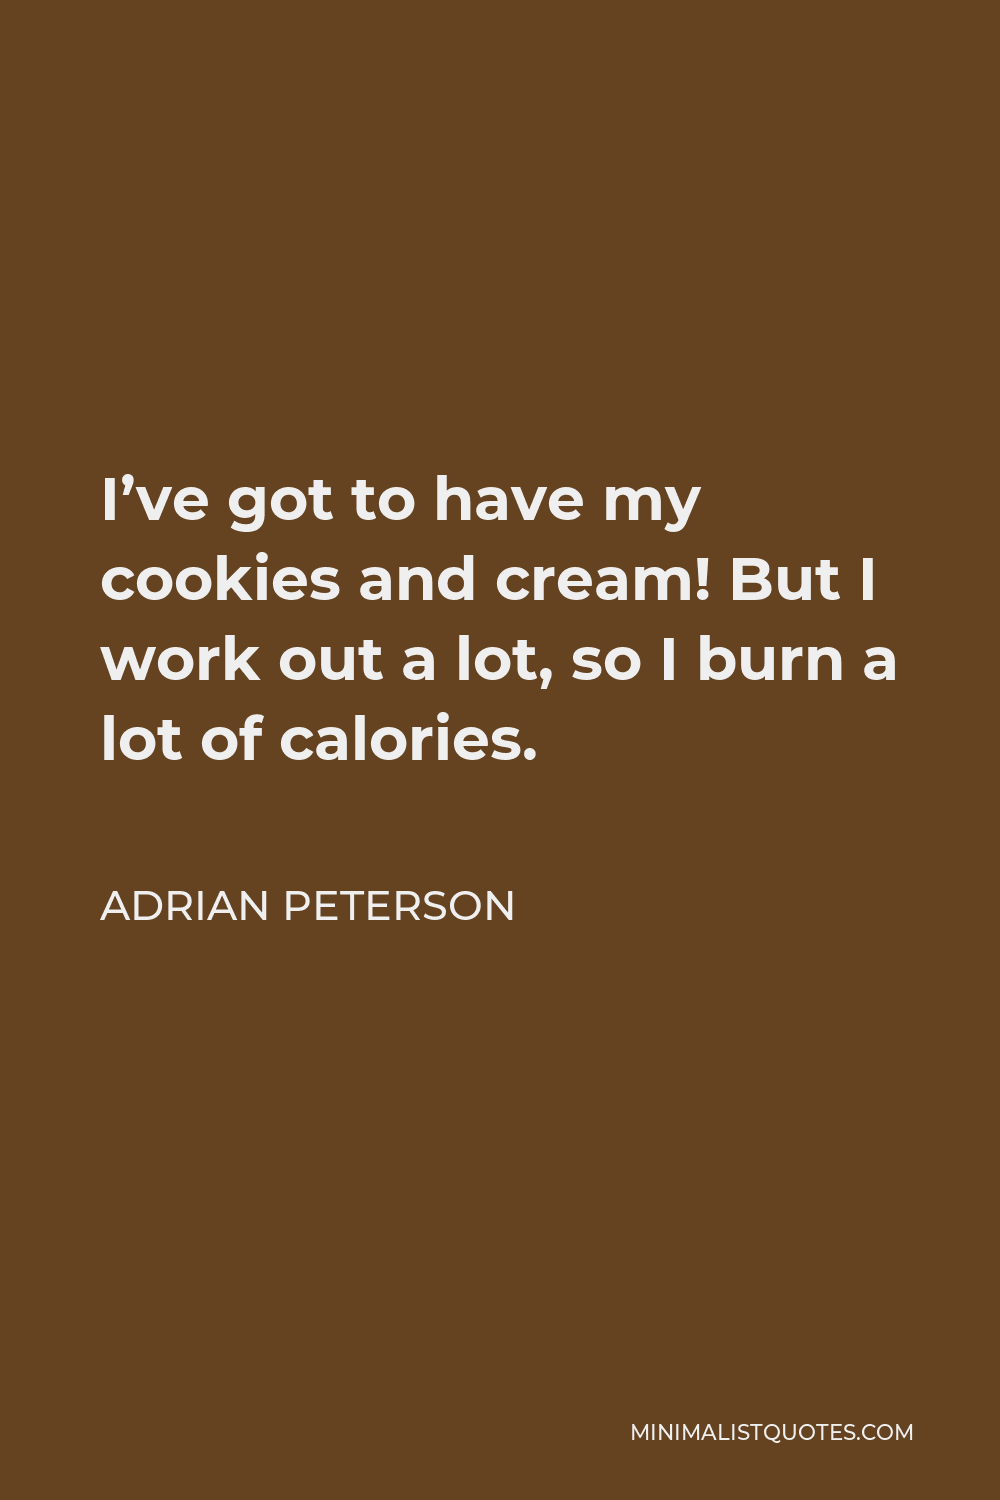 Adrian Peterson Quote - I’ve got to have my cookies and cream! But I work out a lot, so I burn a lot of calories.